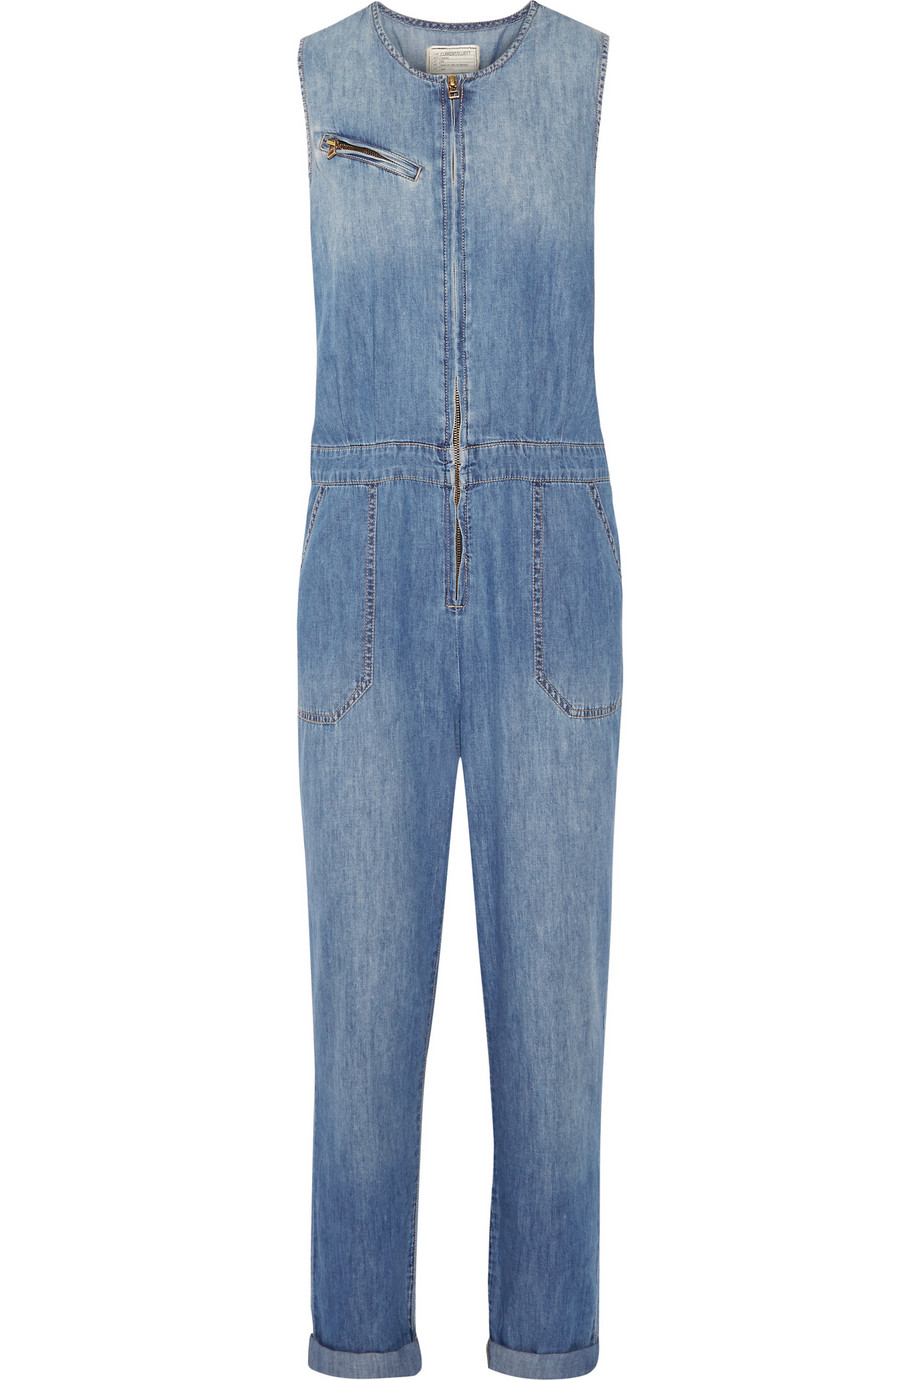 5 of the best: Denim jumpsuits - The Single Mother Edit